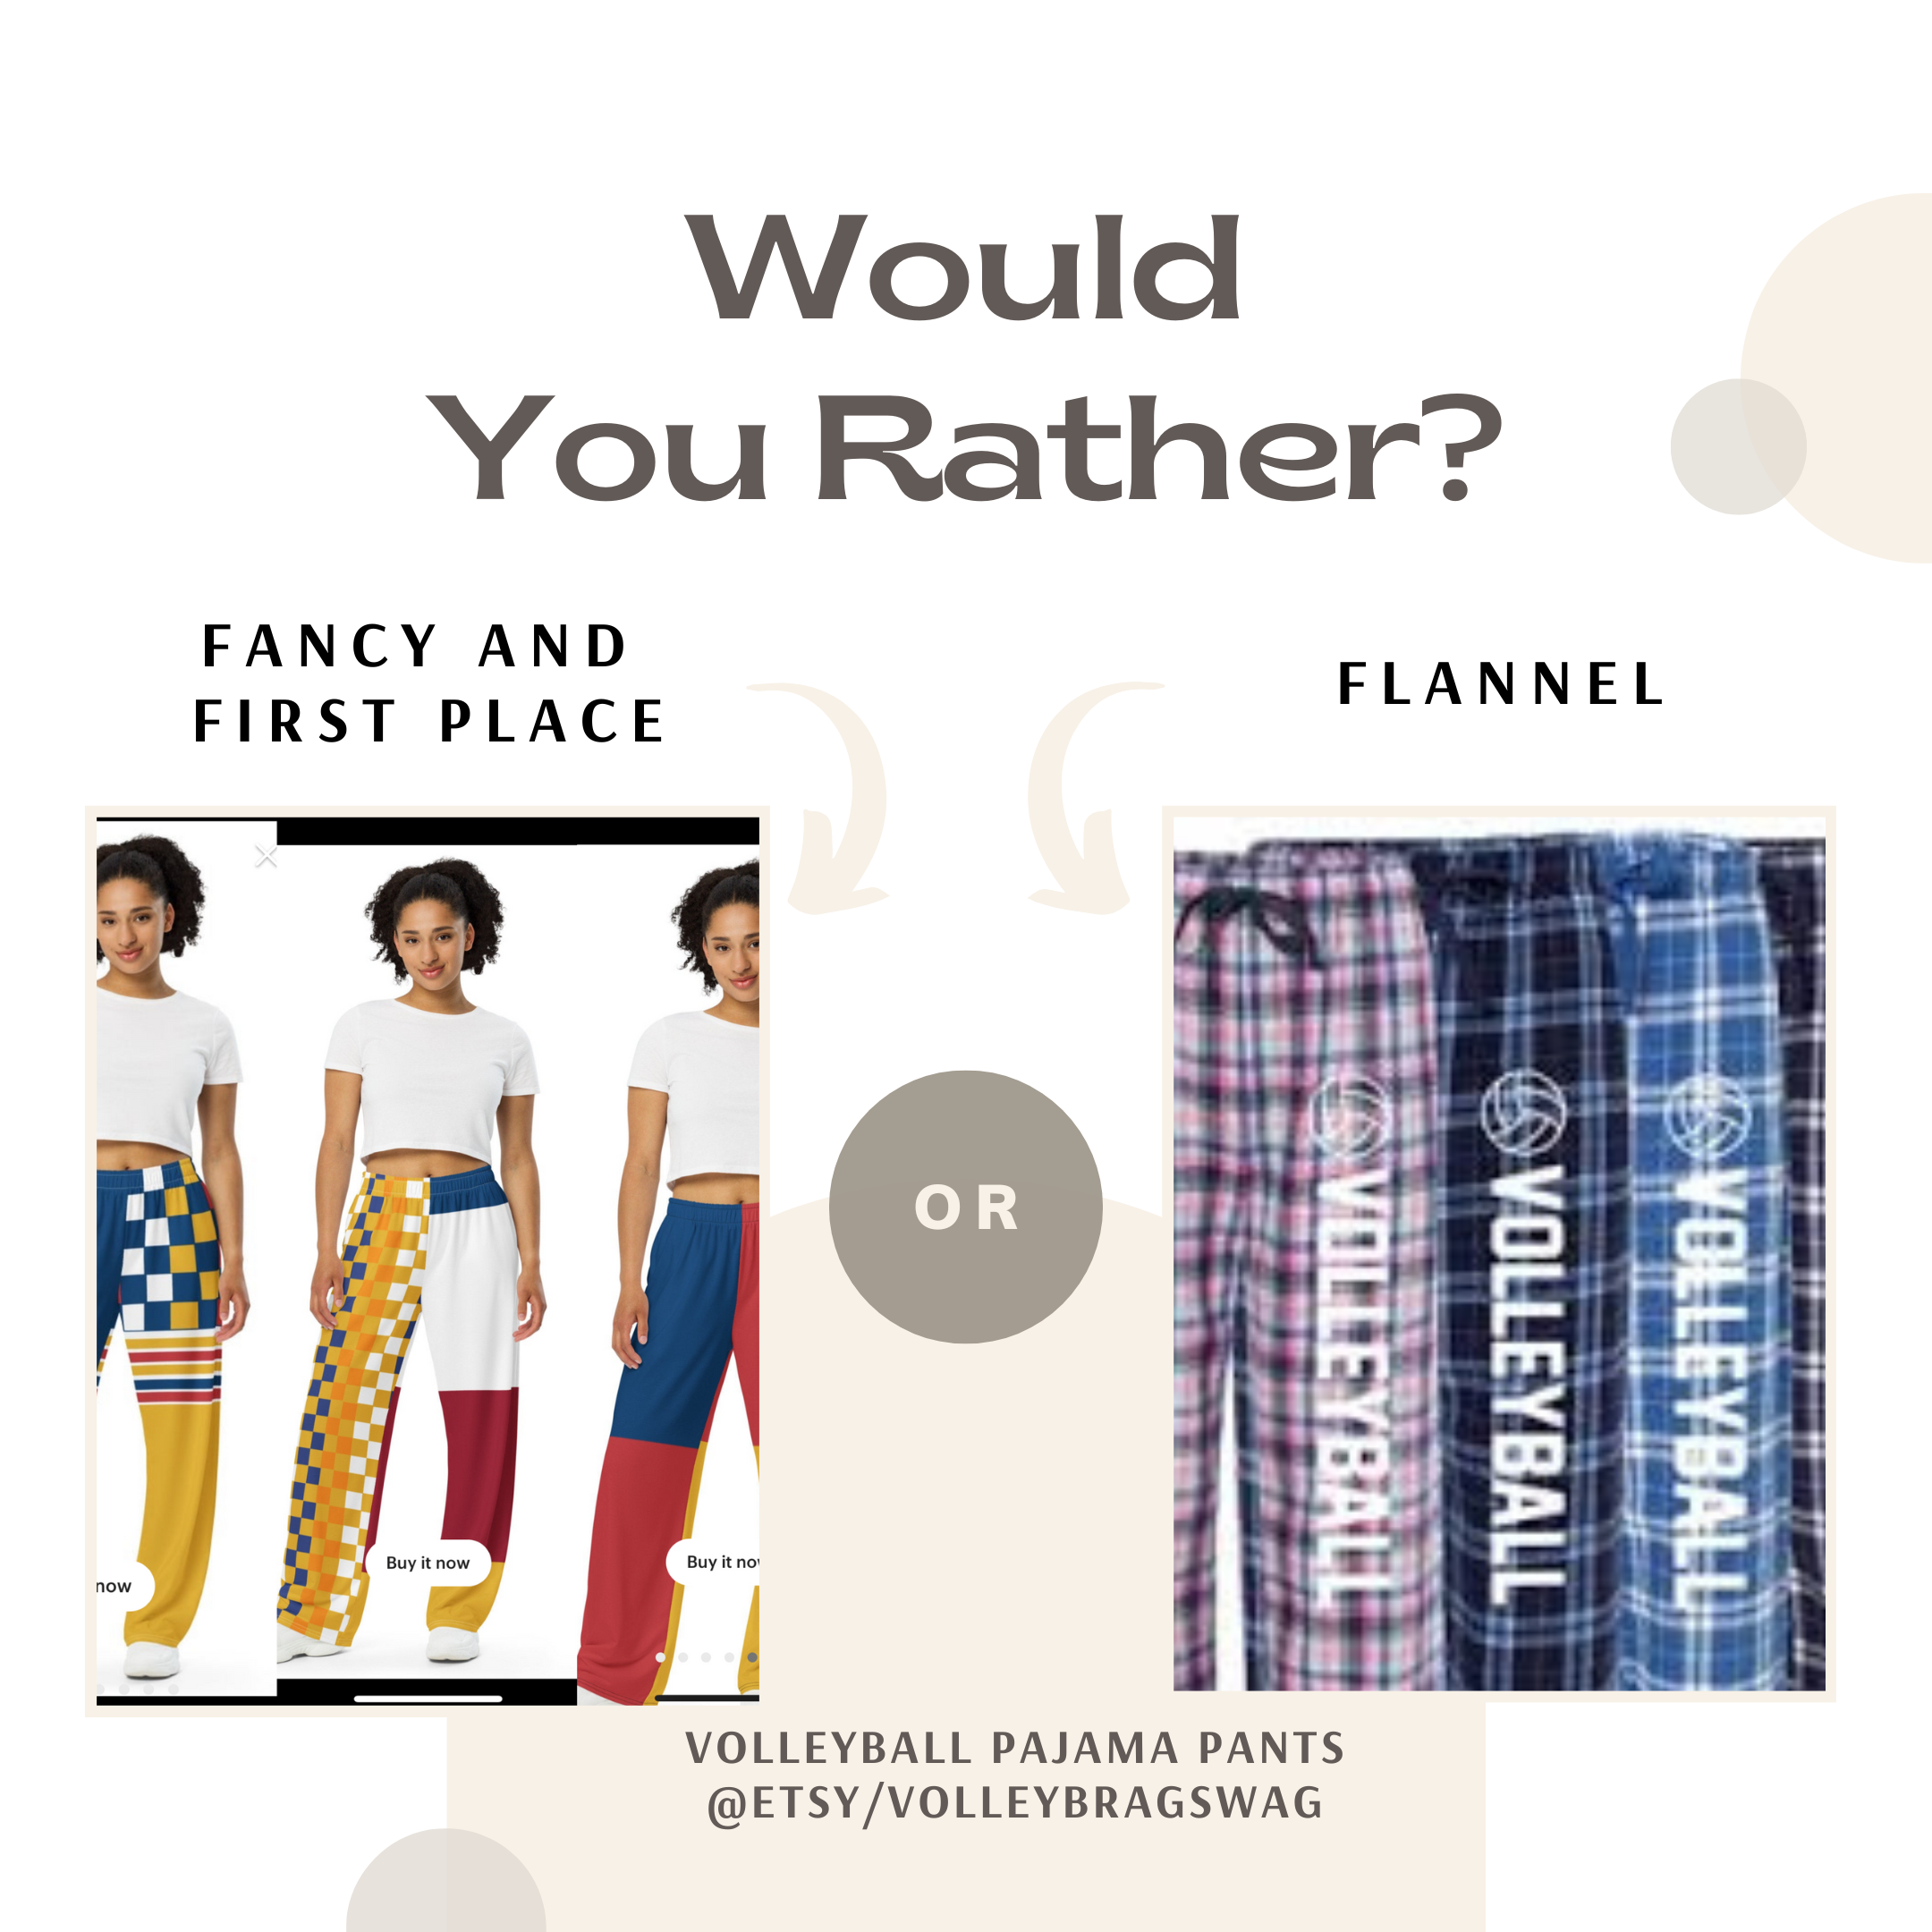 Upgrade your game! Say good bye to your 2022 flannel volleyball pants and say hello to the new 2023 Volleybragswag collection of flirty volleyball pj pants.